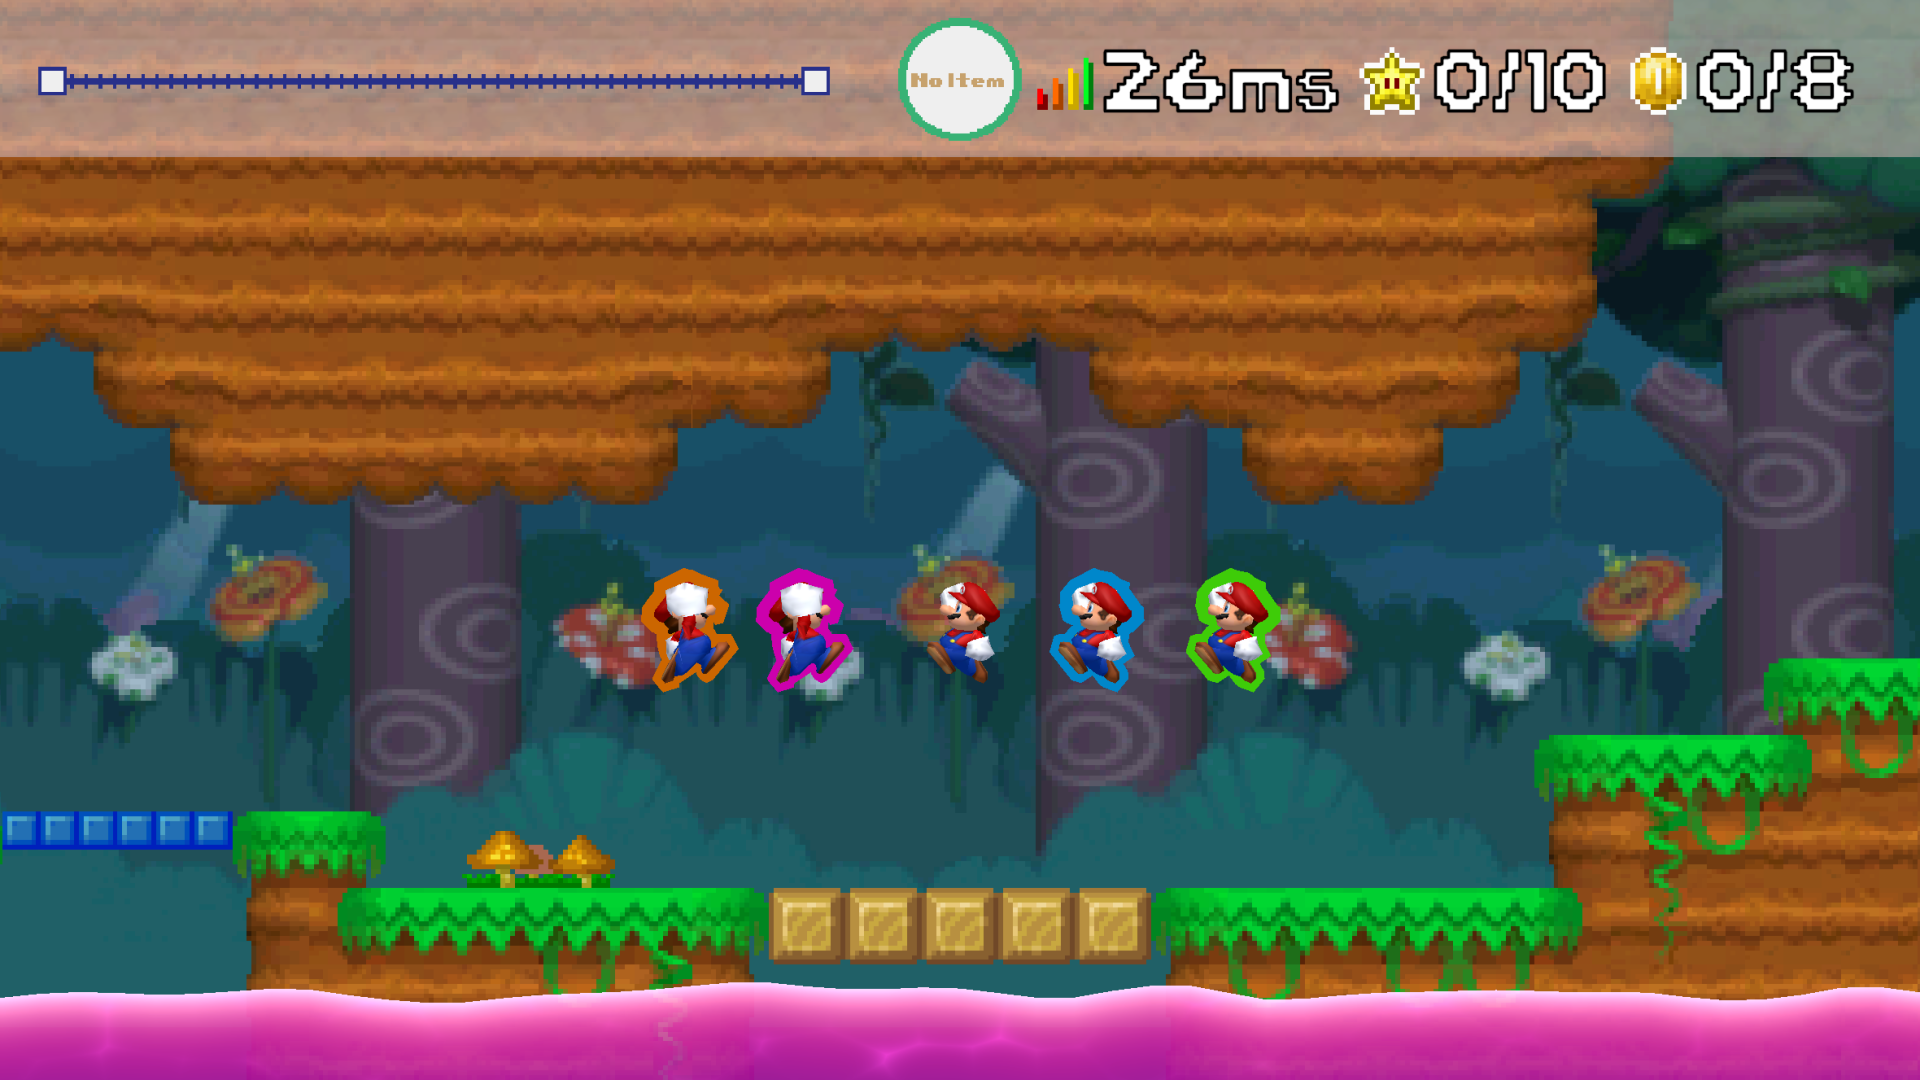 Download Super Mario Bros. (with 2 player mode) & Play Free